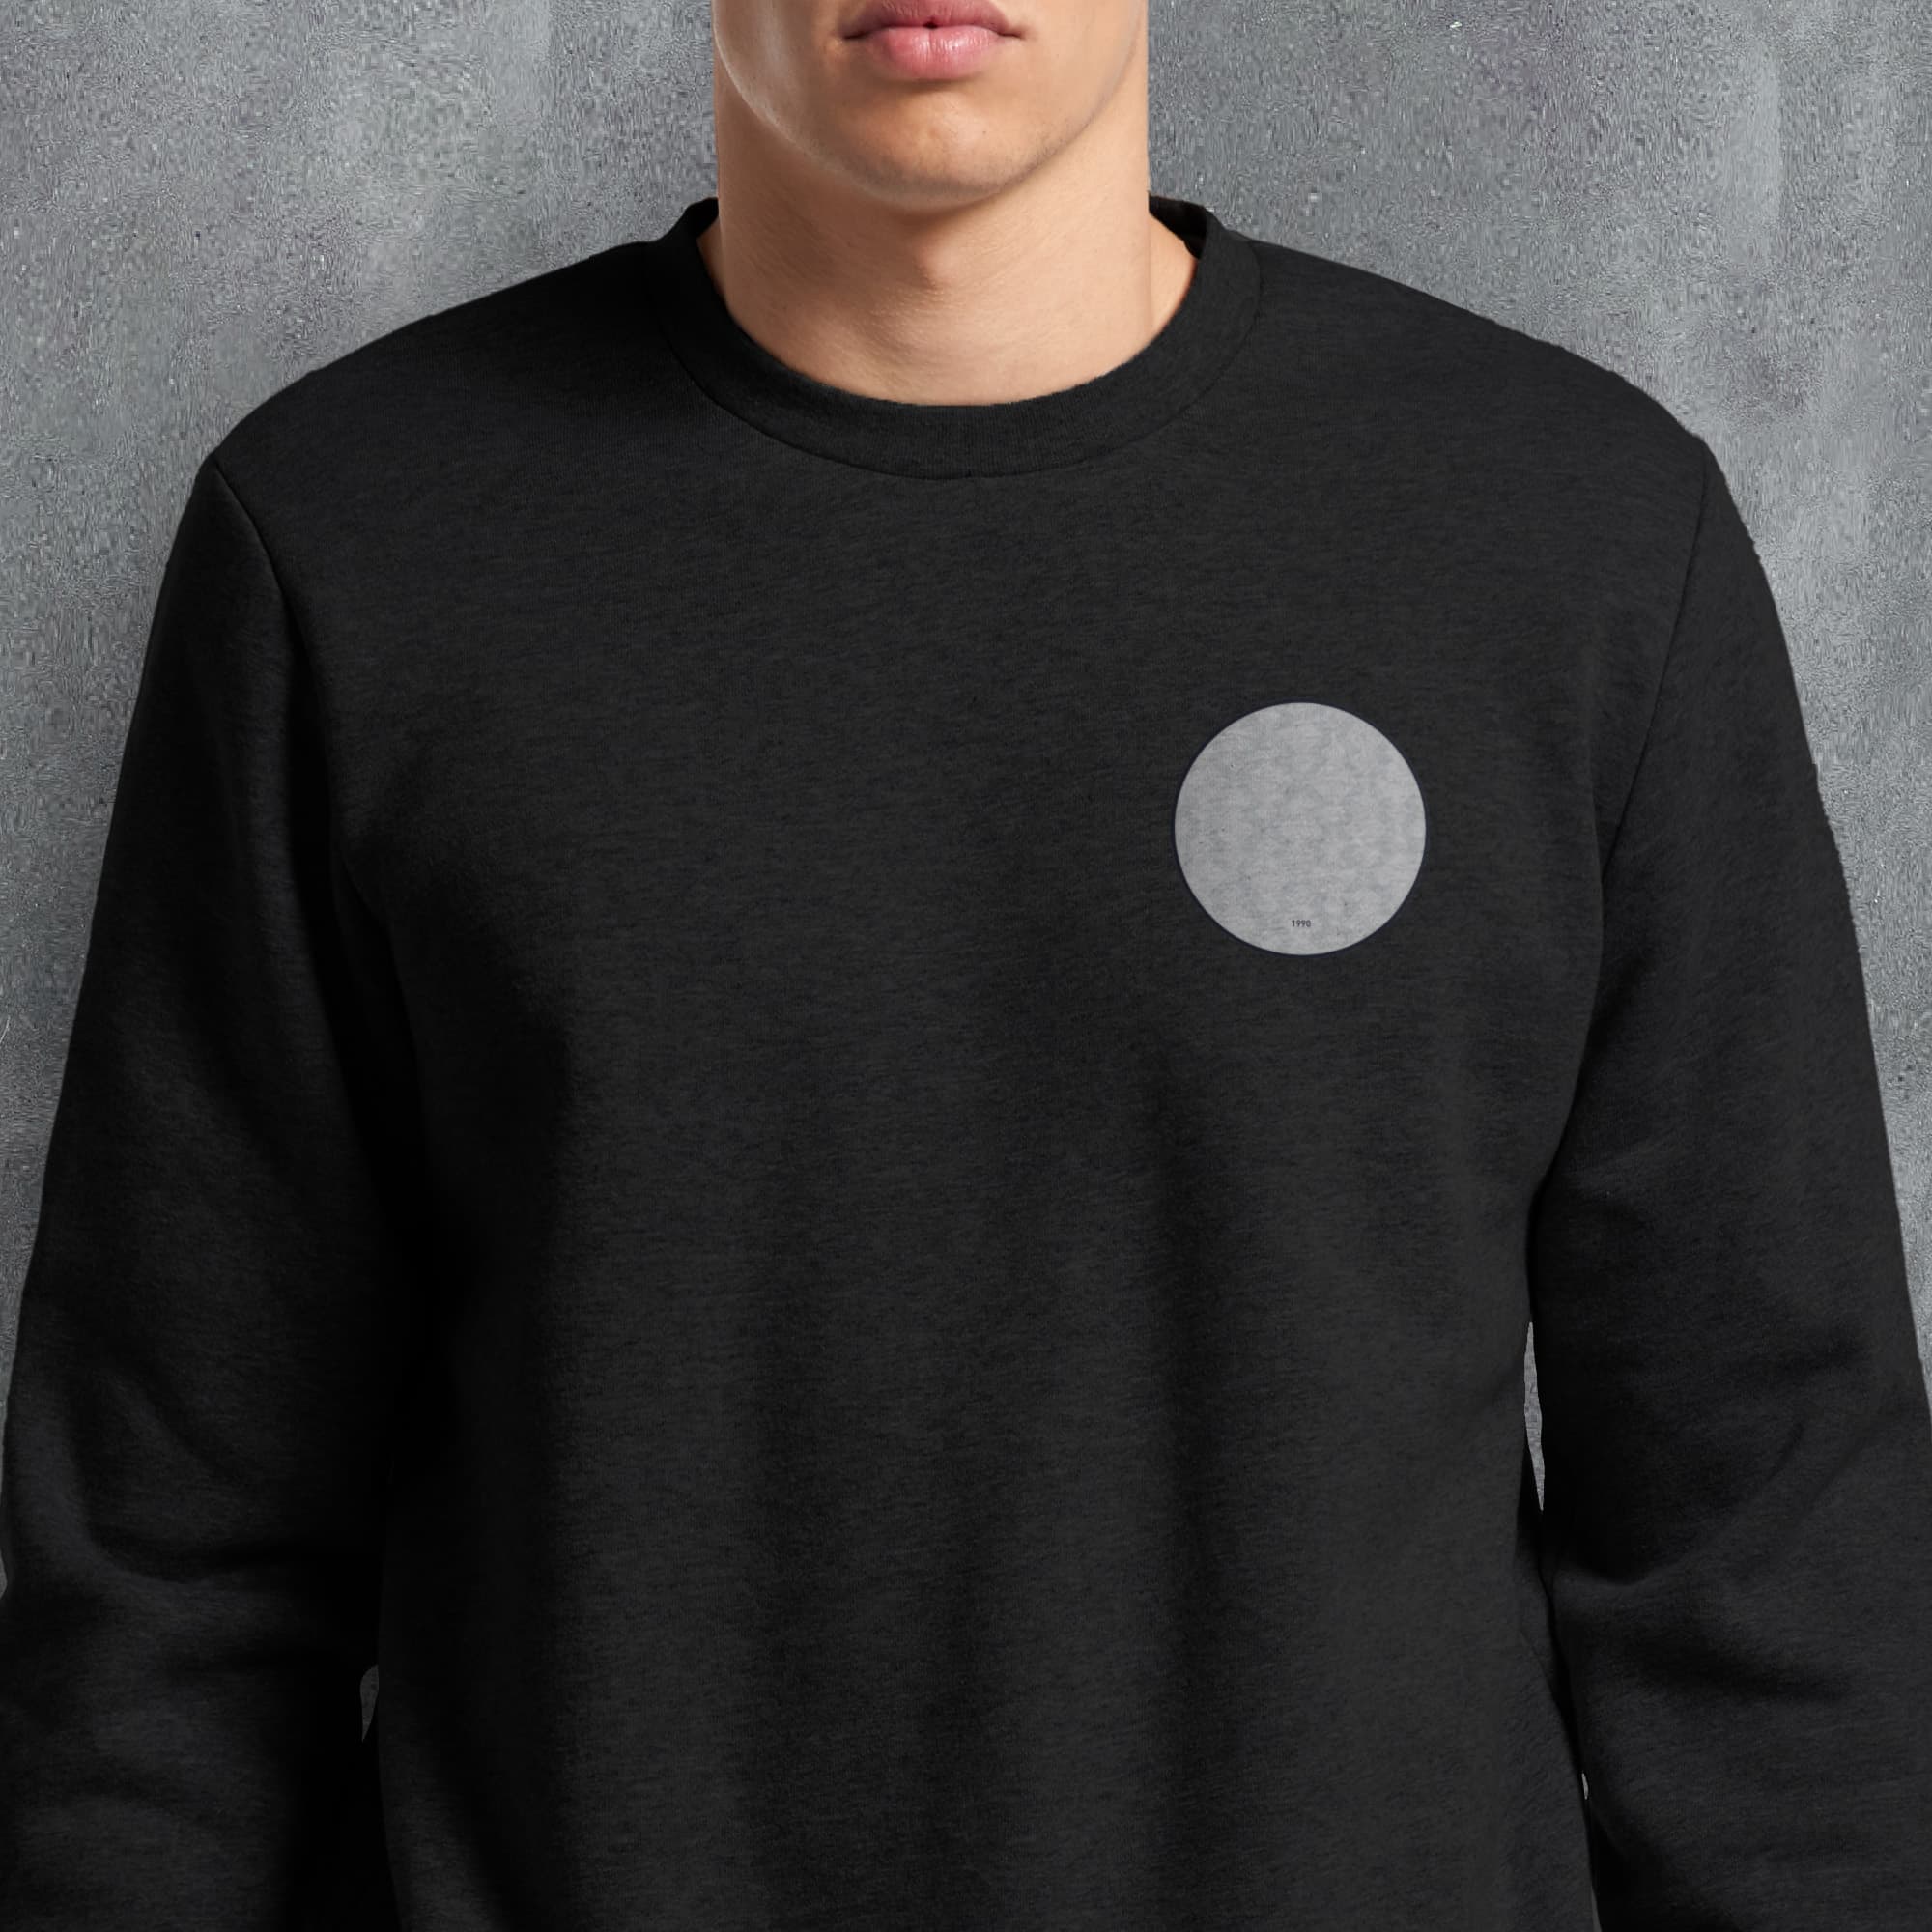 a man wearing a black sweatshirt with a white circle on it